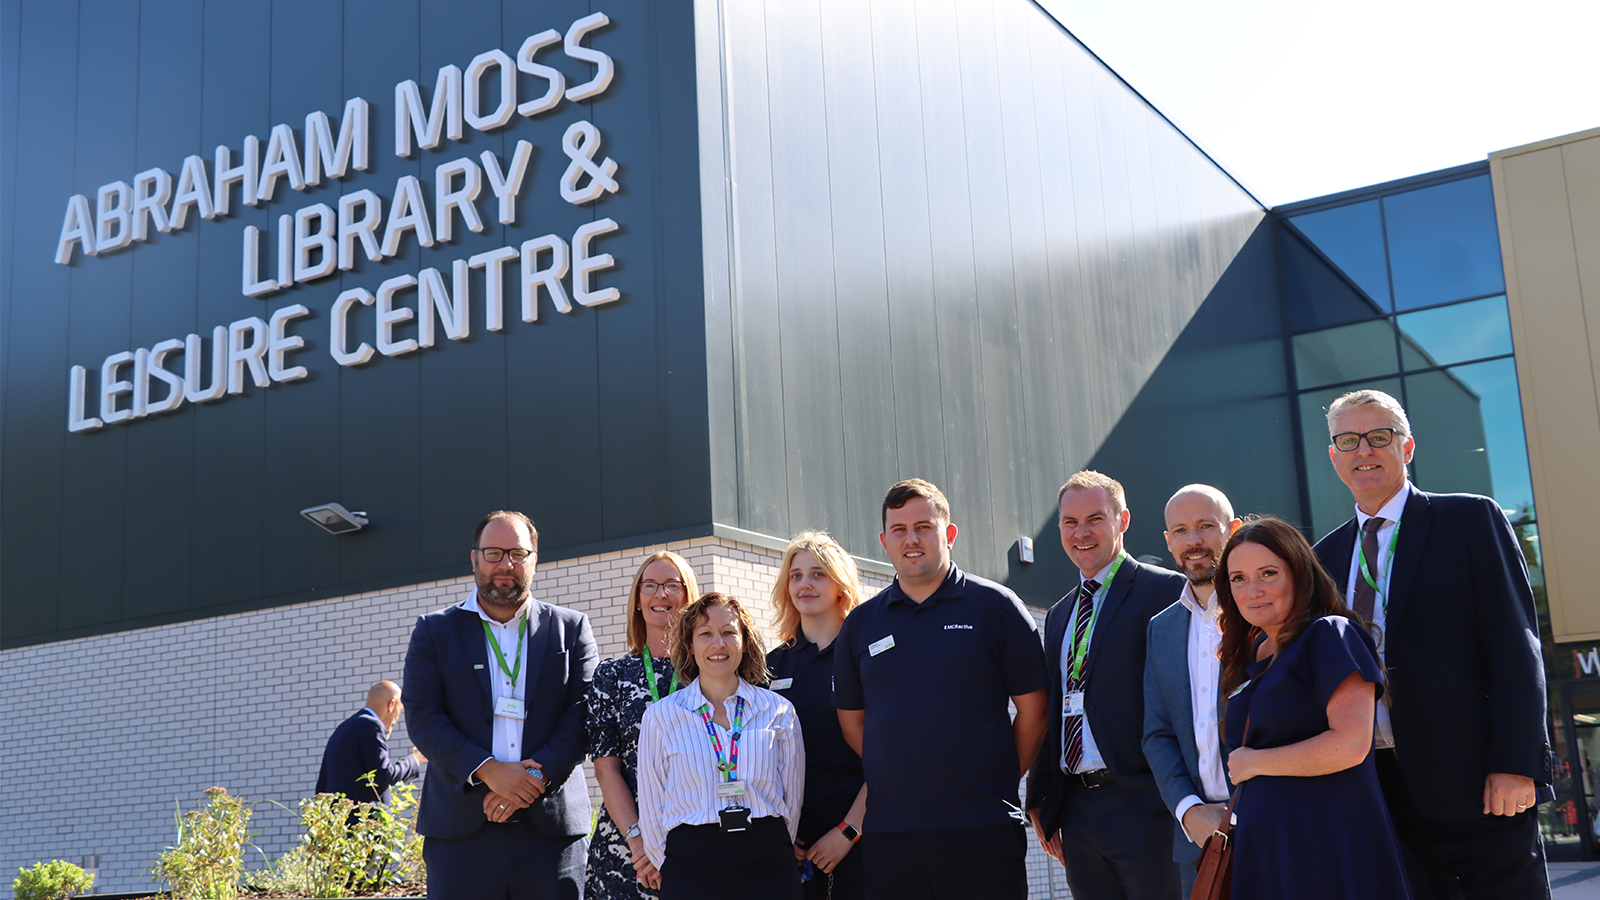 Abraham Moss Library and Leisure Centre official opening